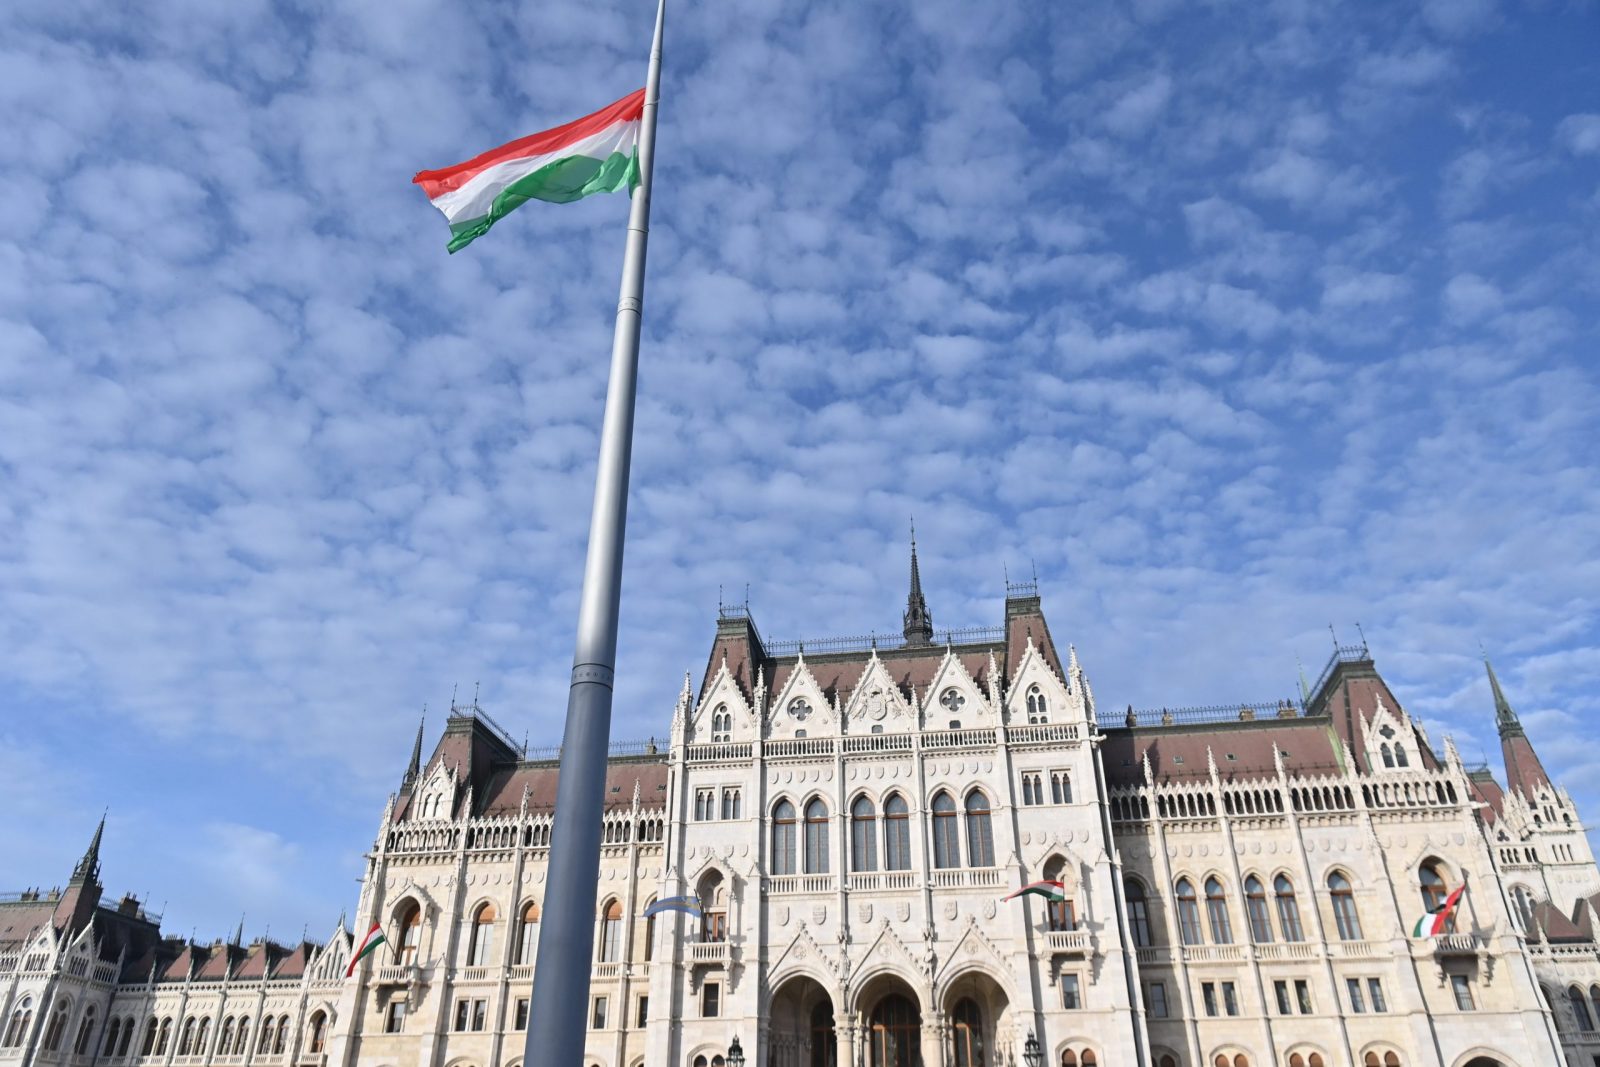 epa10933955 The Hungarian national flag flies after it was raised in front of the Parliament building during a state commemoration ceremony to mark the 67th anniversary of the outbreak of the Hungarian revolution and war of independence against communist rule and the Soviet Union in 1956 in Budapest, Hungary, 23 October 2023.  EPA/NOEMI BRUZAK HUNGARY OUT